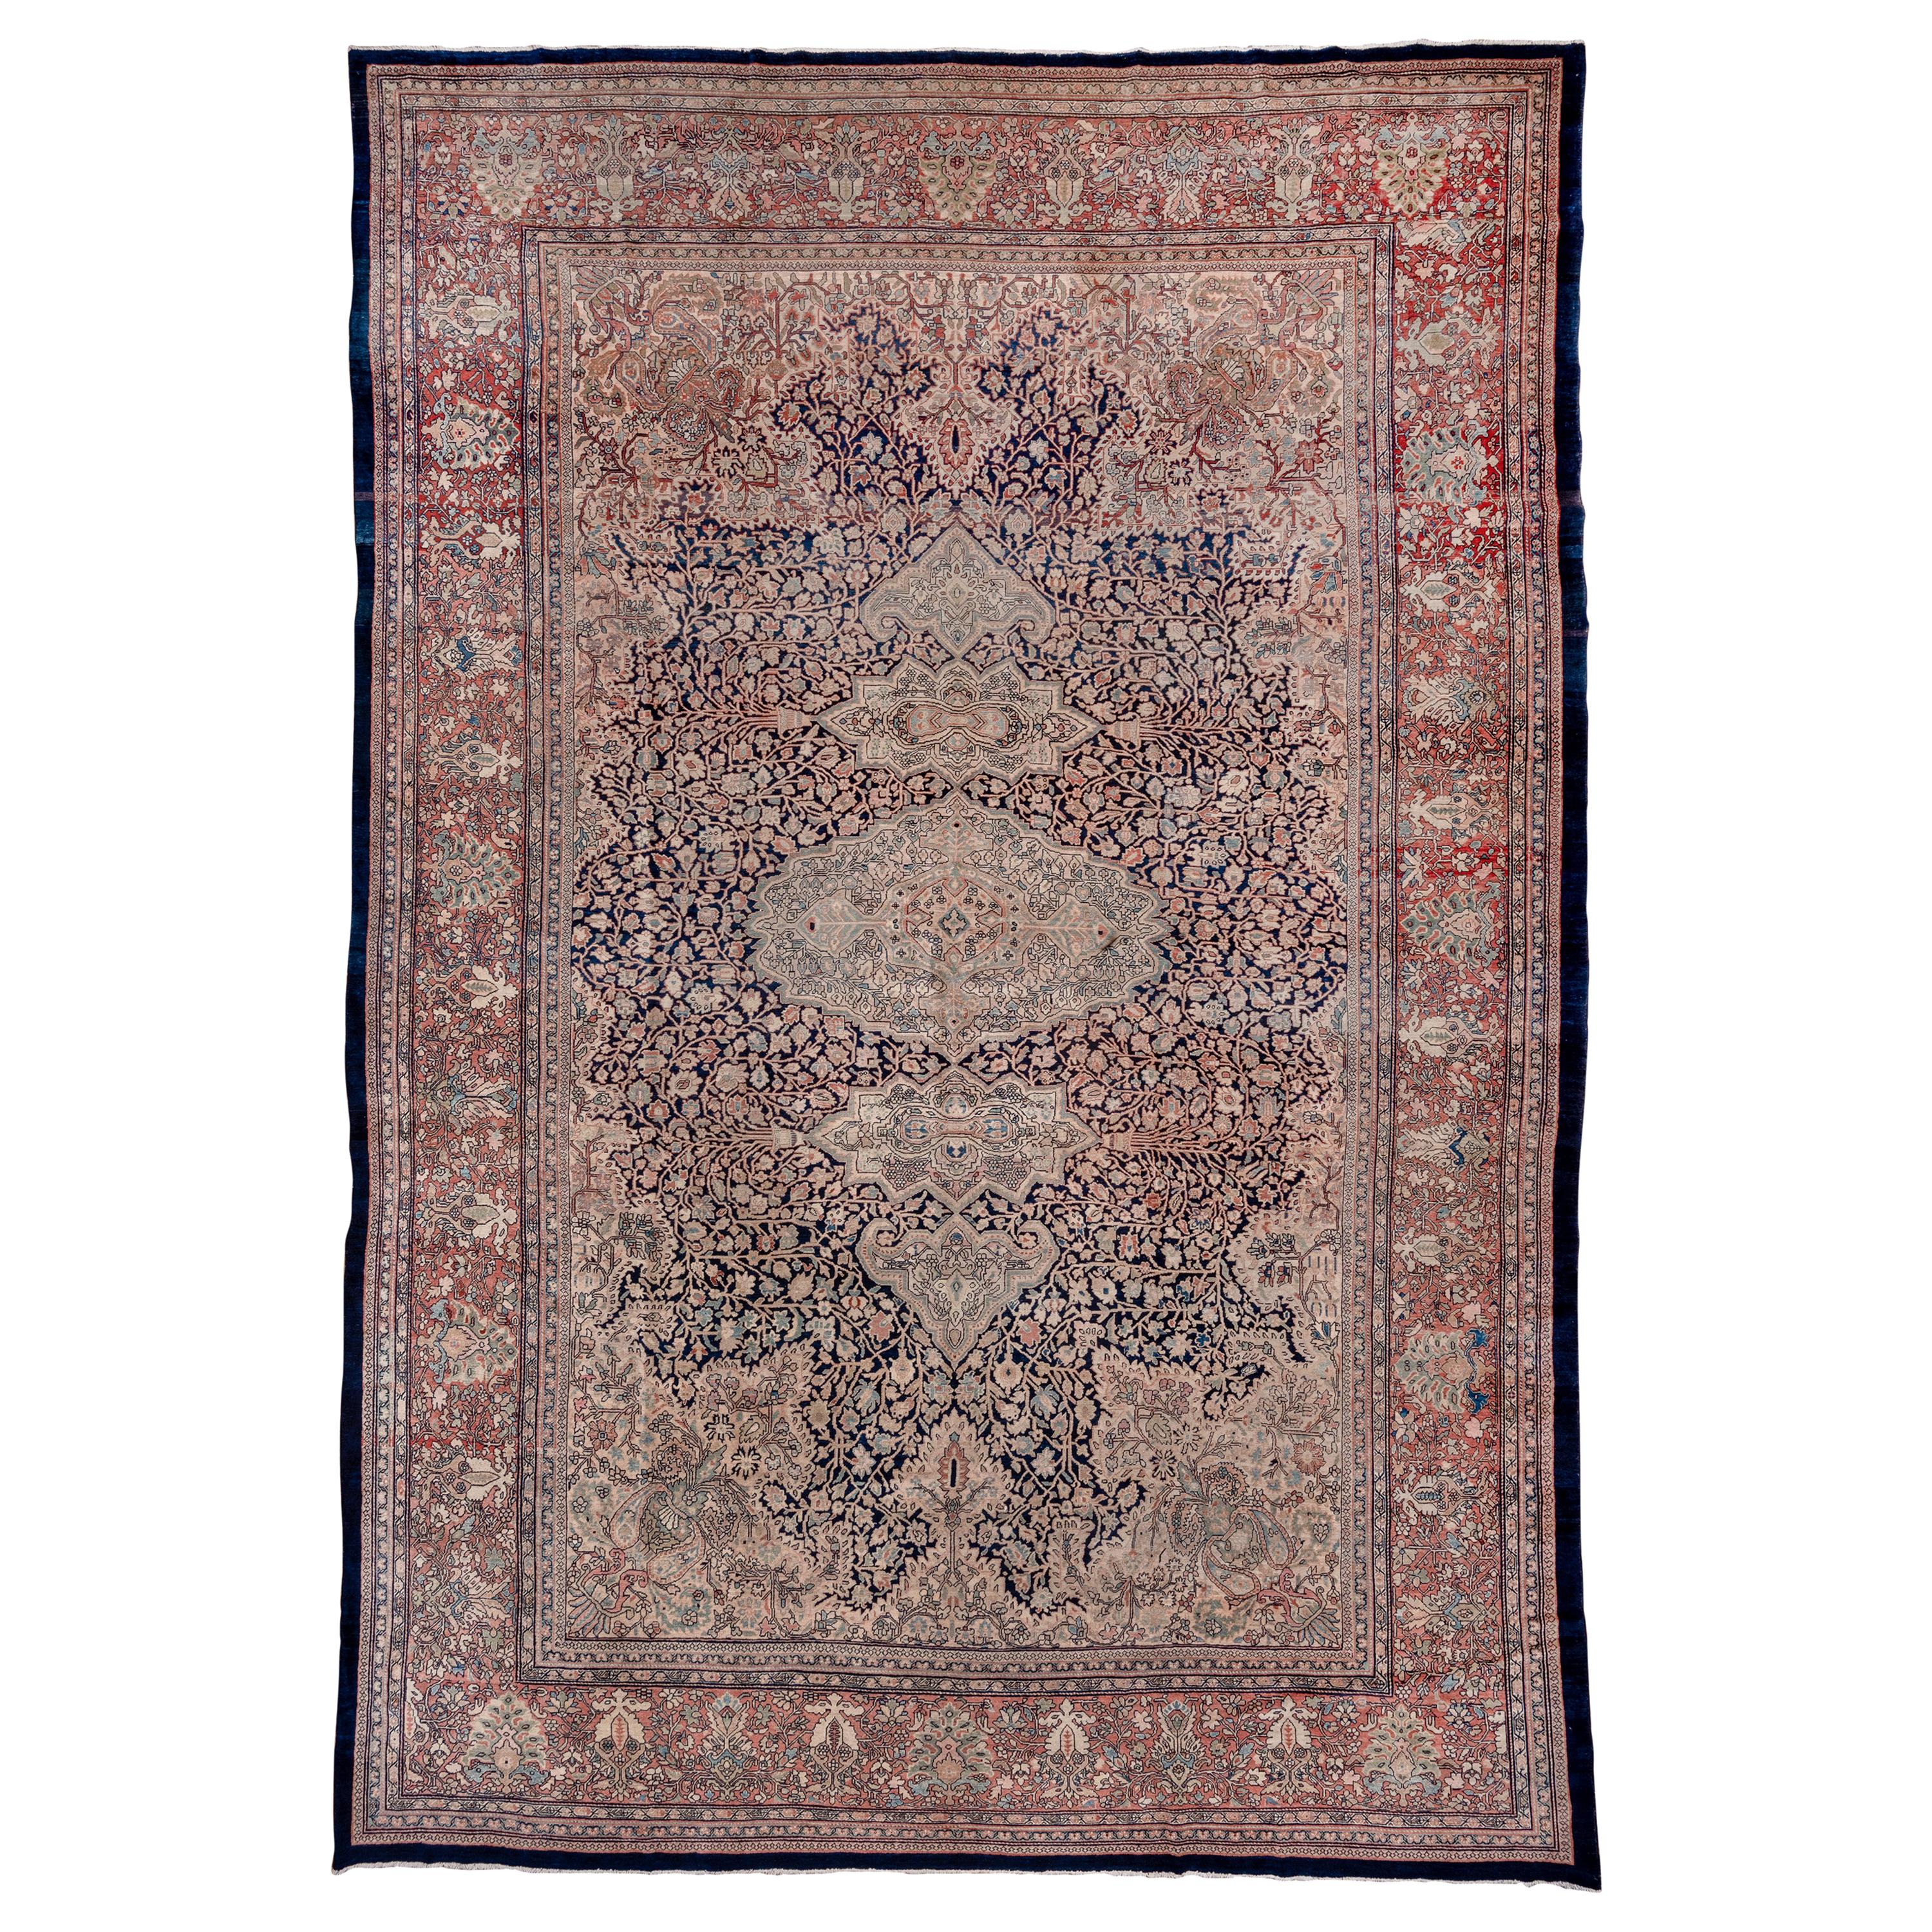 Antique Farahan Sarouk Carpet, Navy and Ivory Field, Salmon Pink Borders For Sale